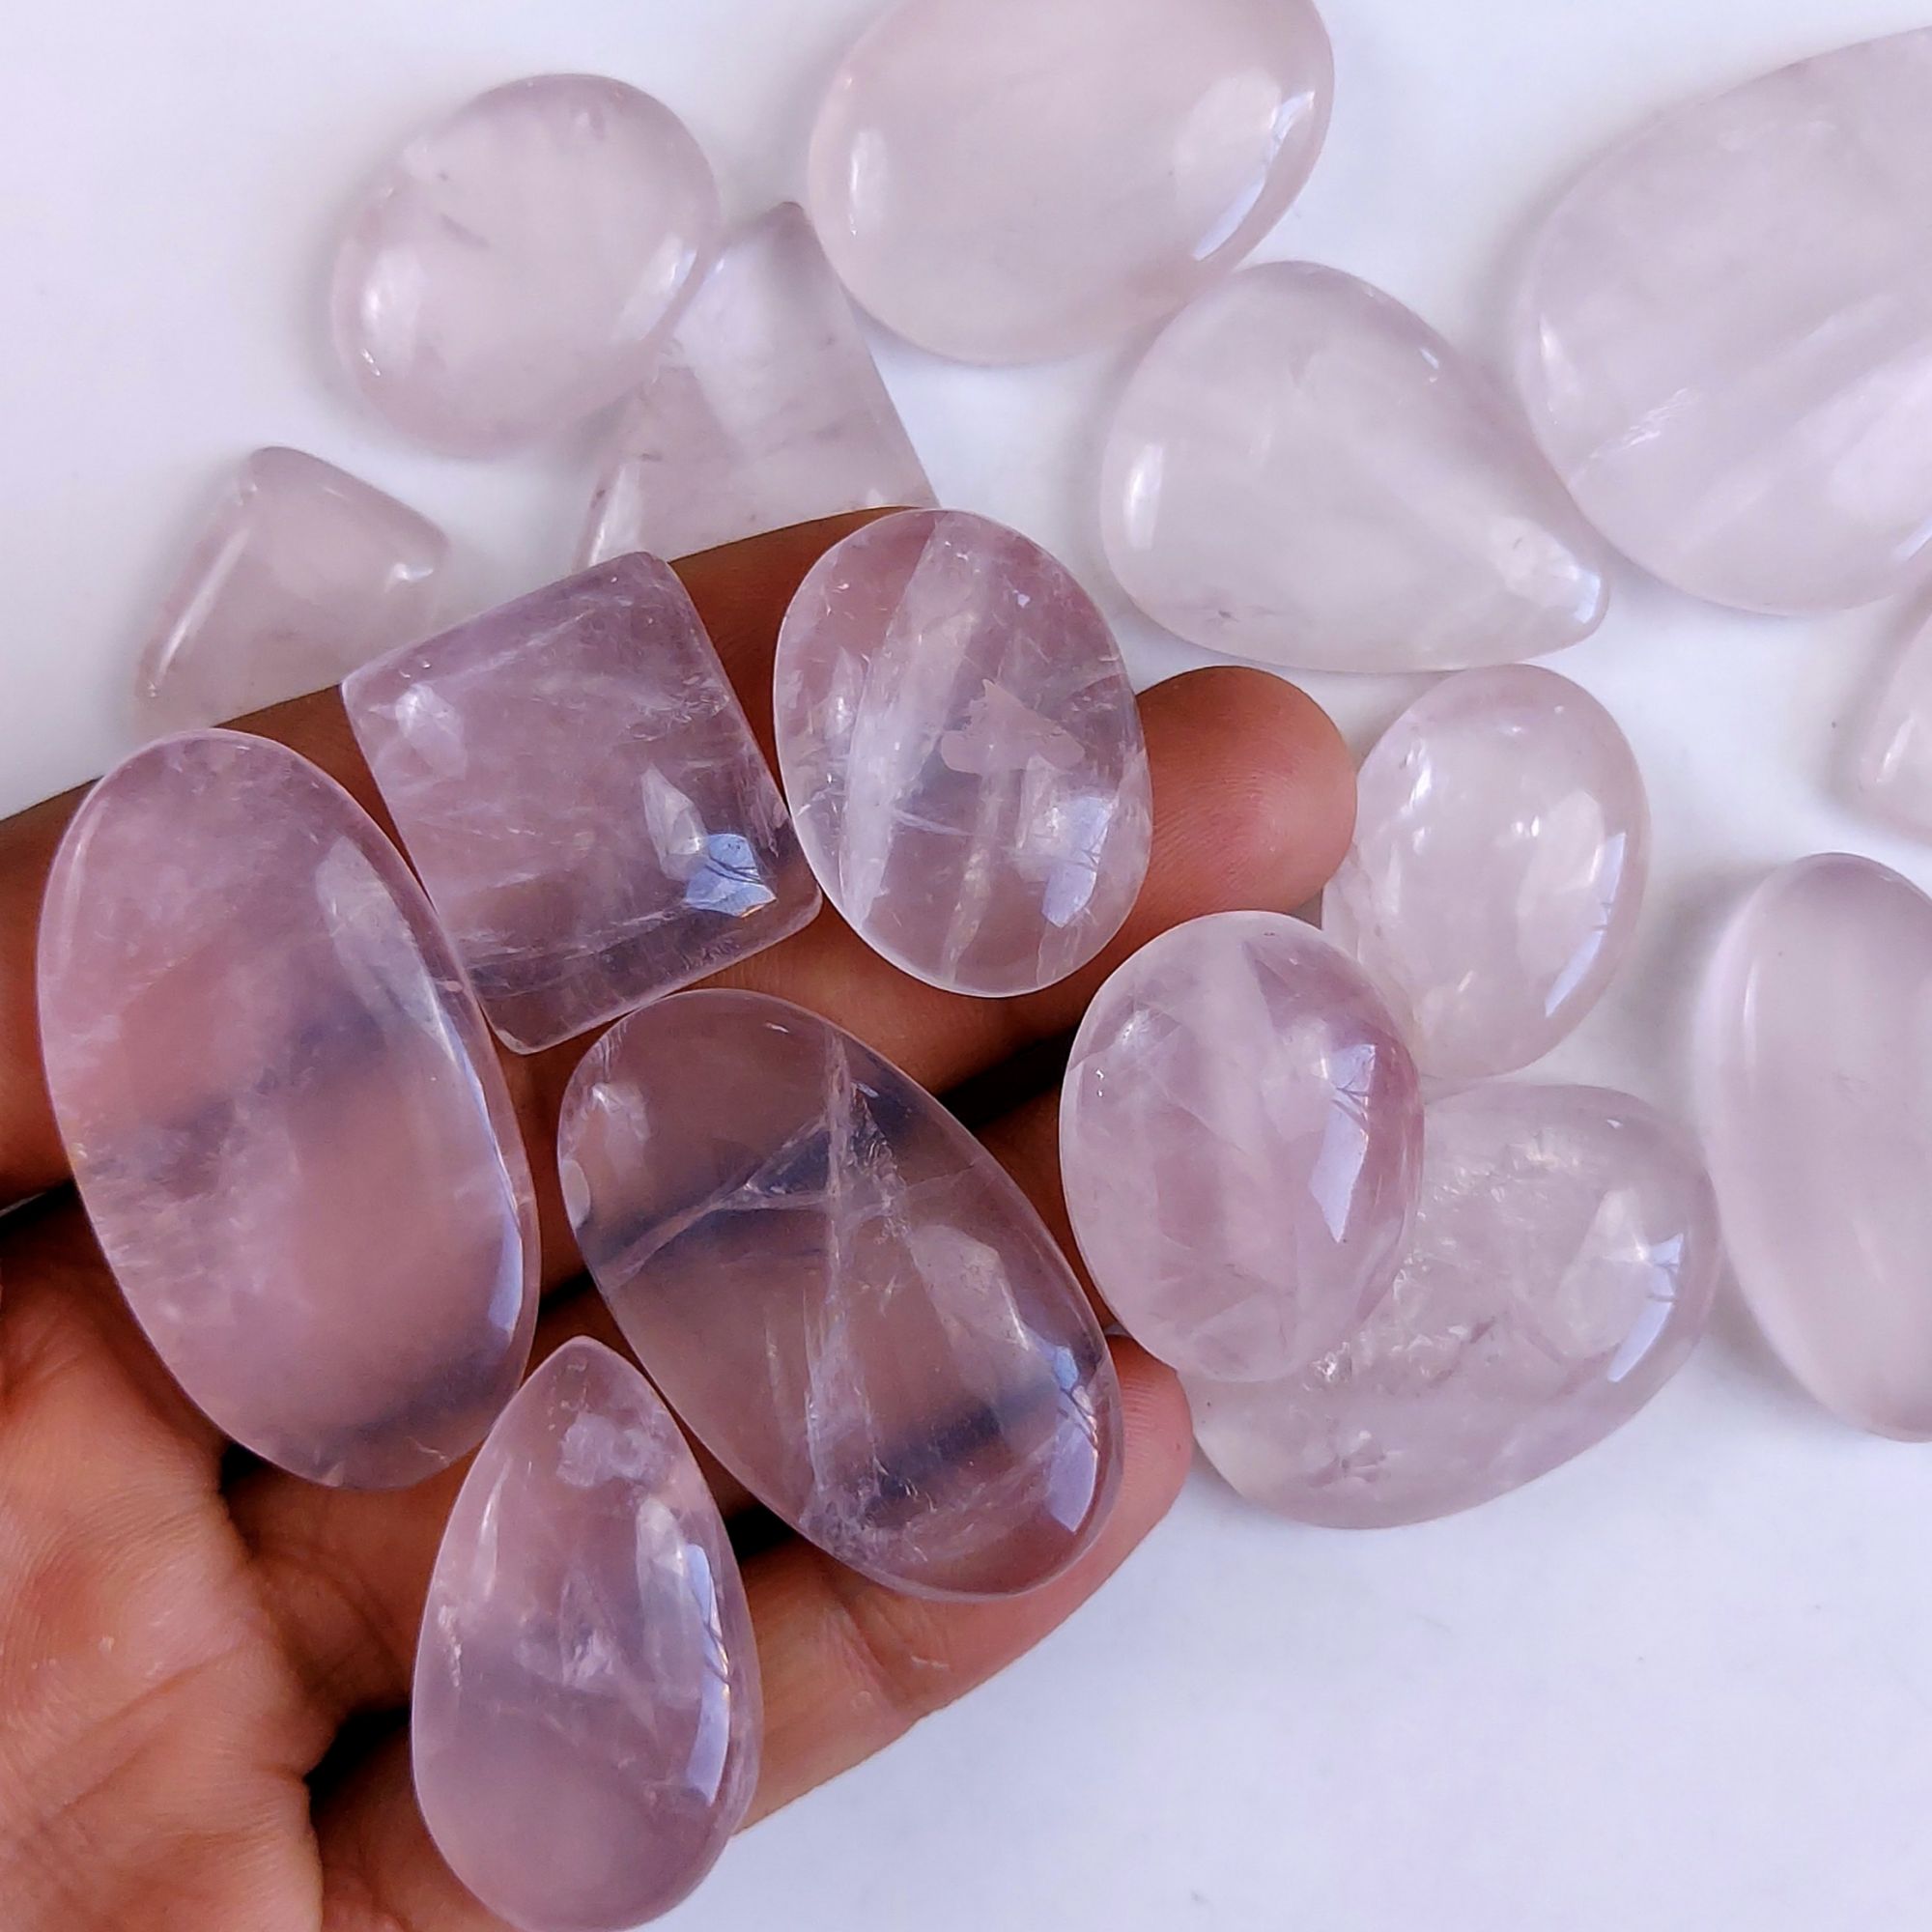 17Pcs 952Cts Natural Rose Quartz Loose Cabochon Gemstone Lot Mix Shape and and Size for Jewelry Making 50x30 15x12mm#1269